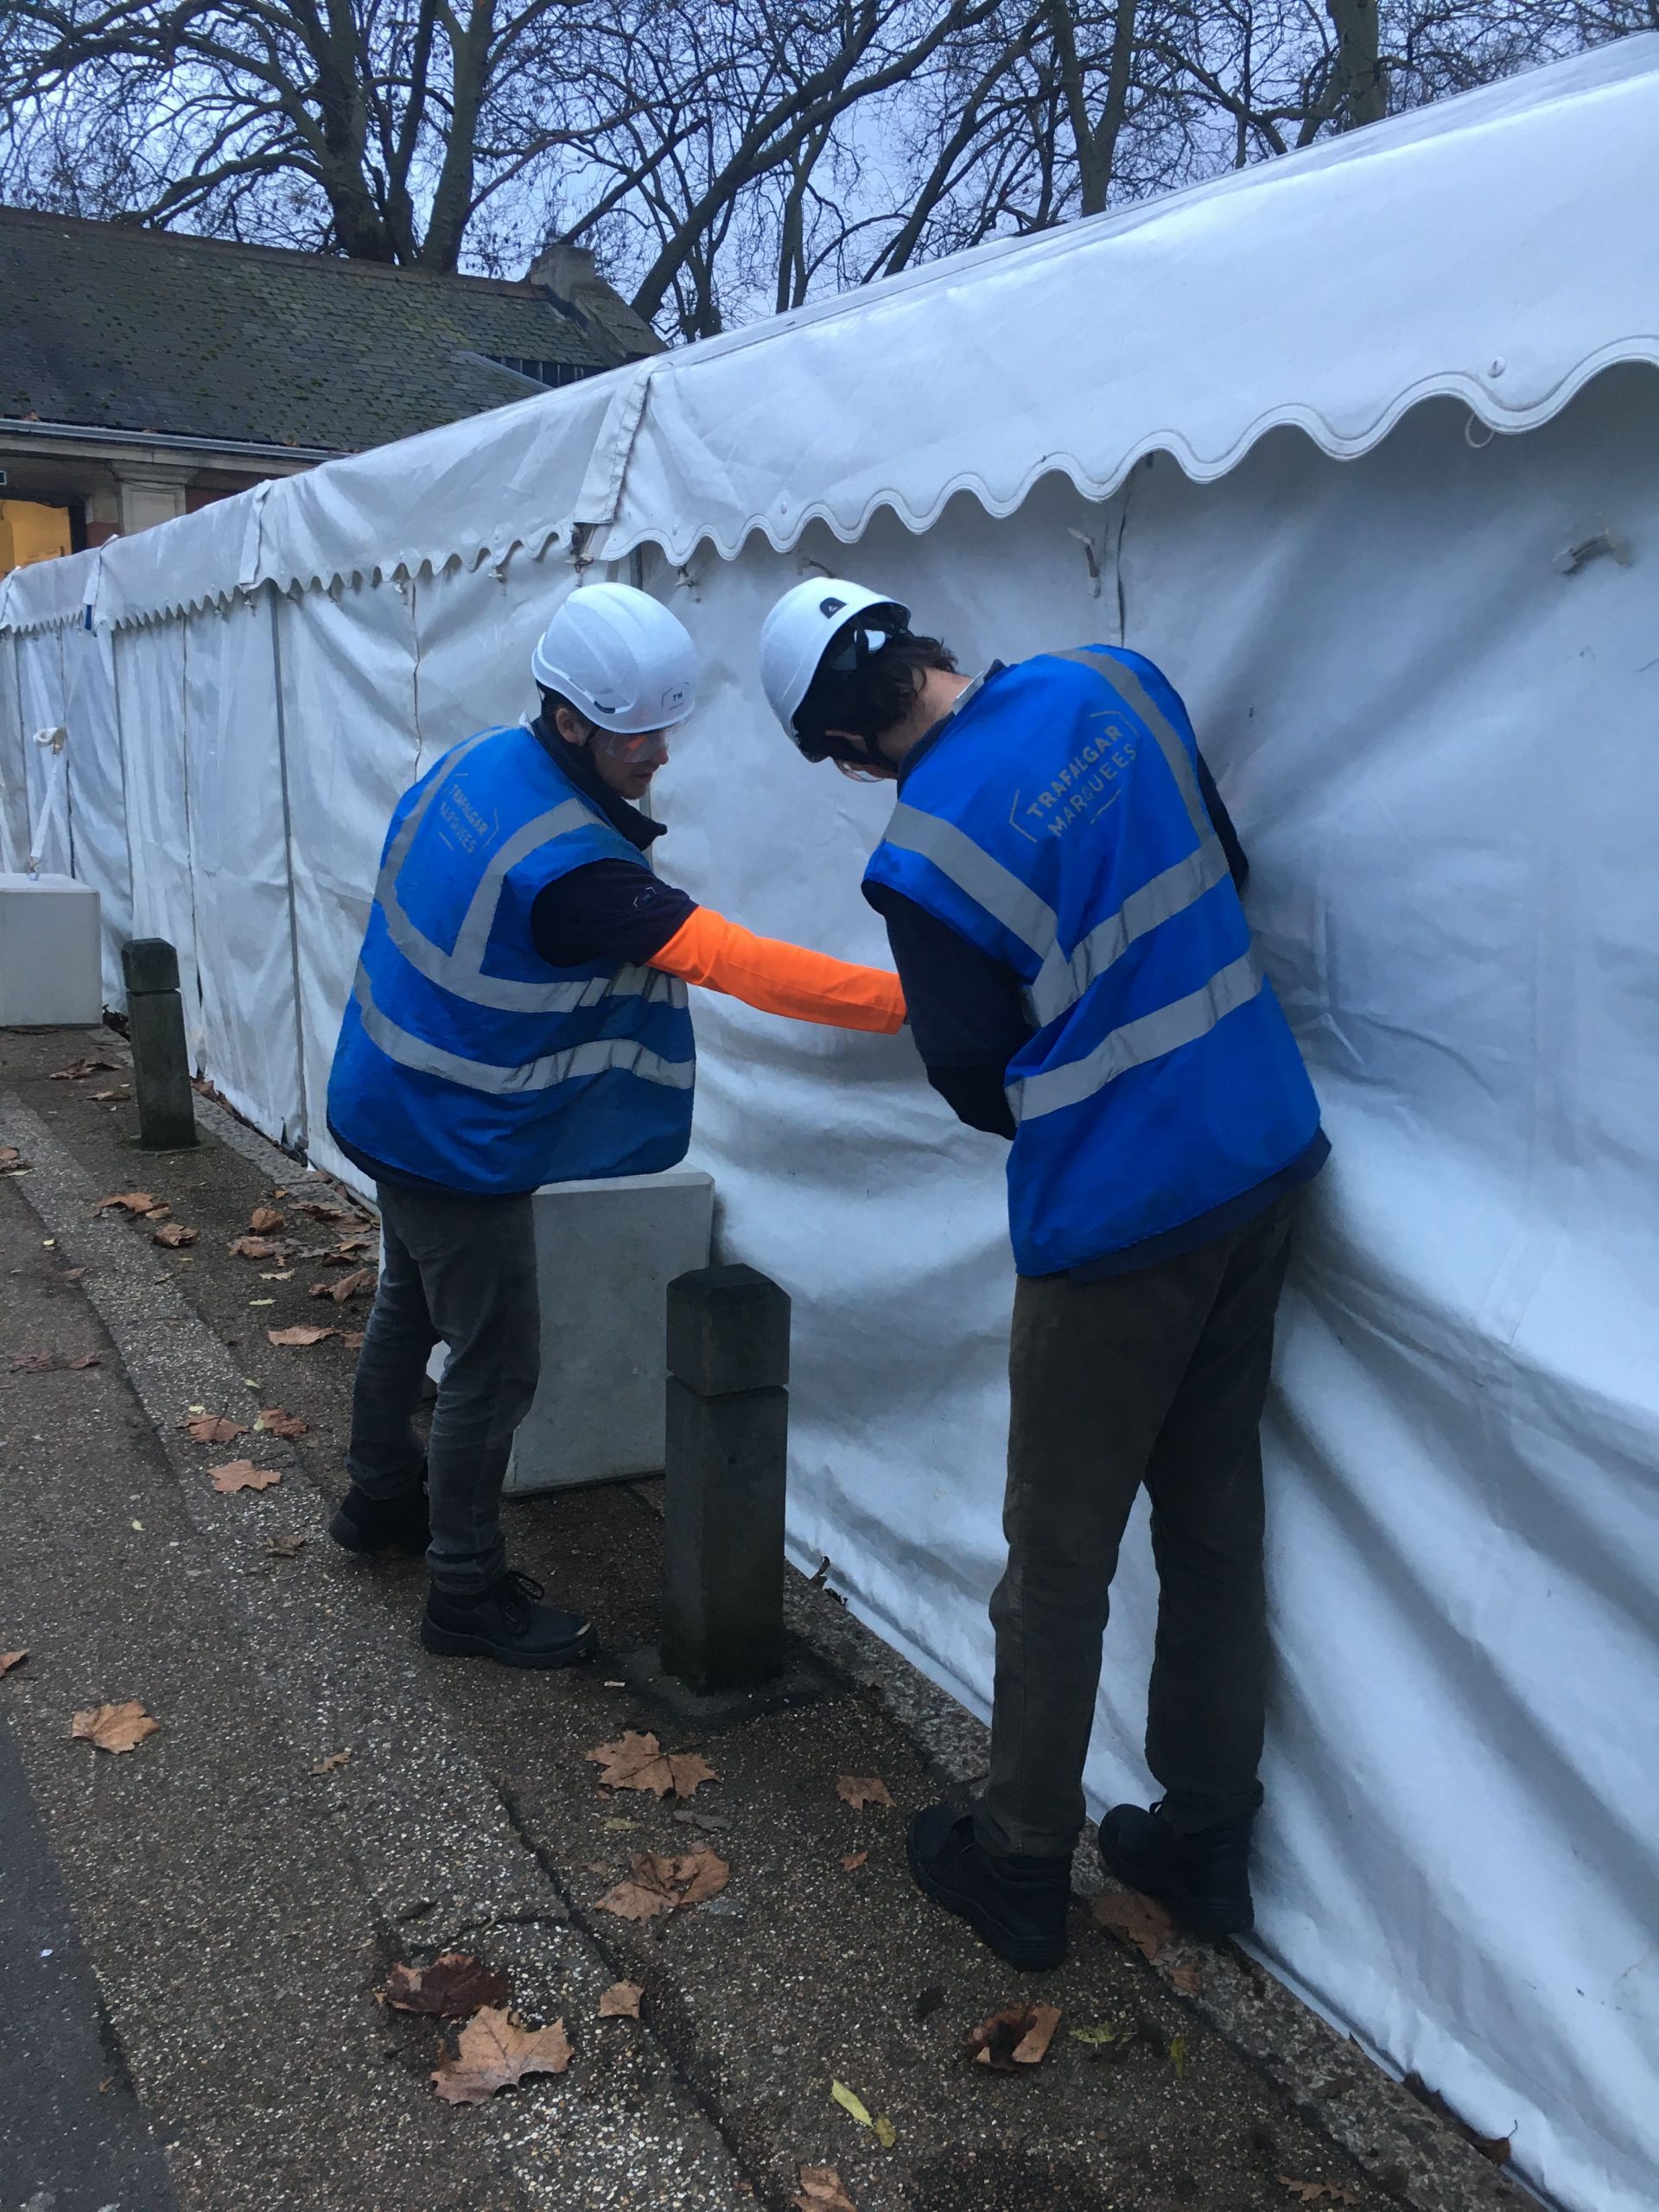 Essential health and safety for your event